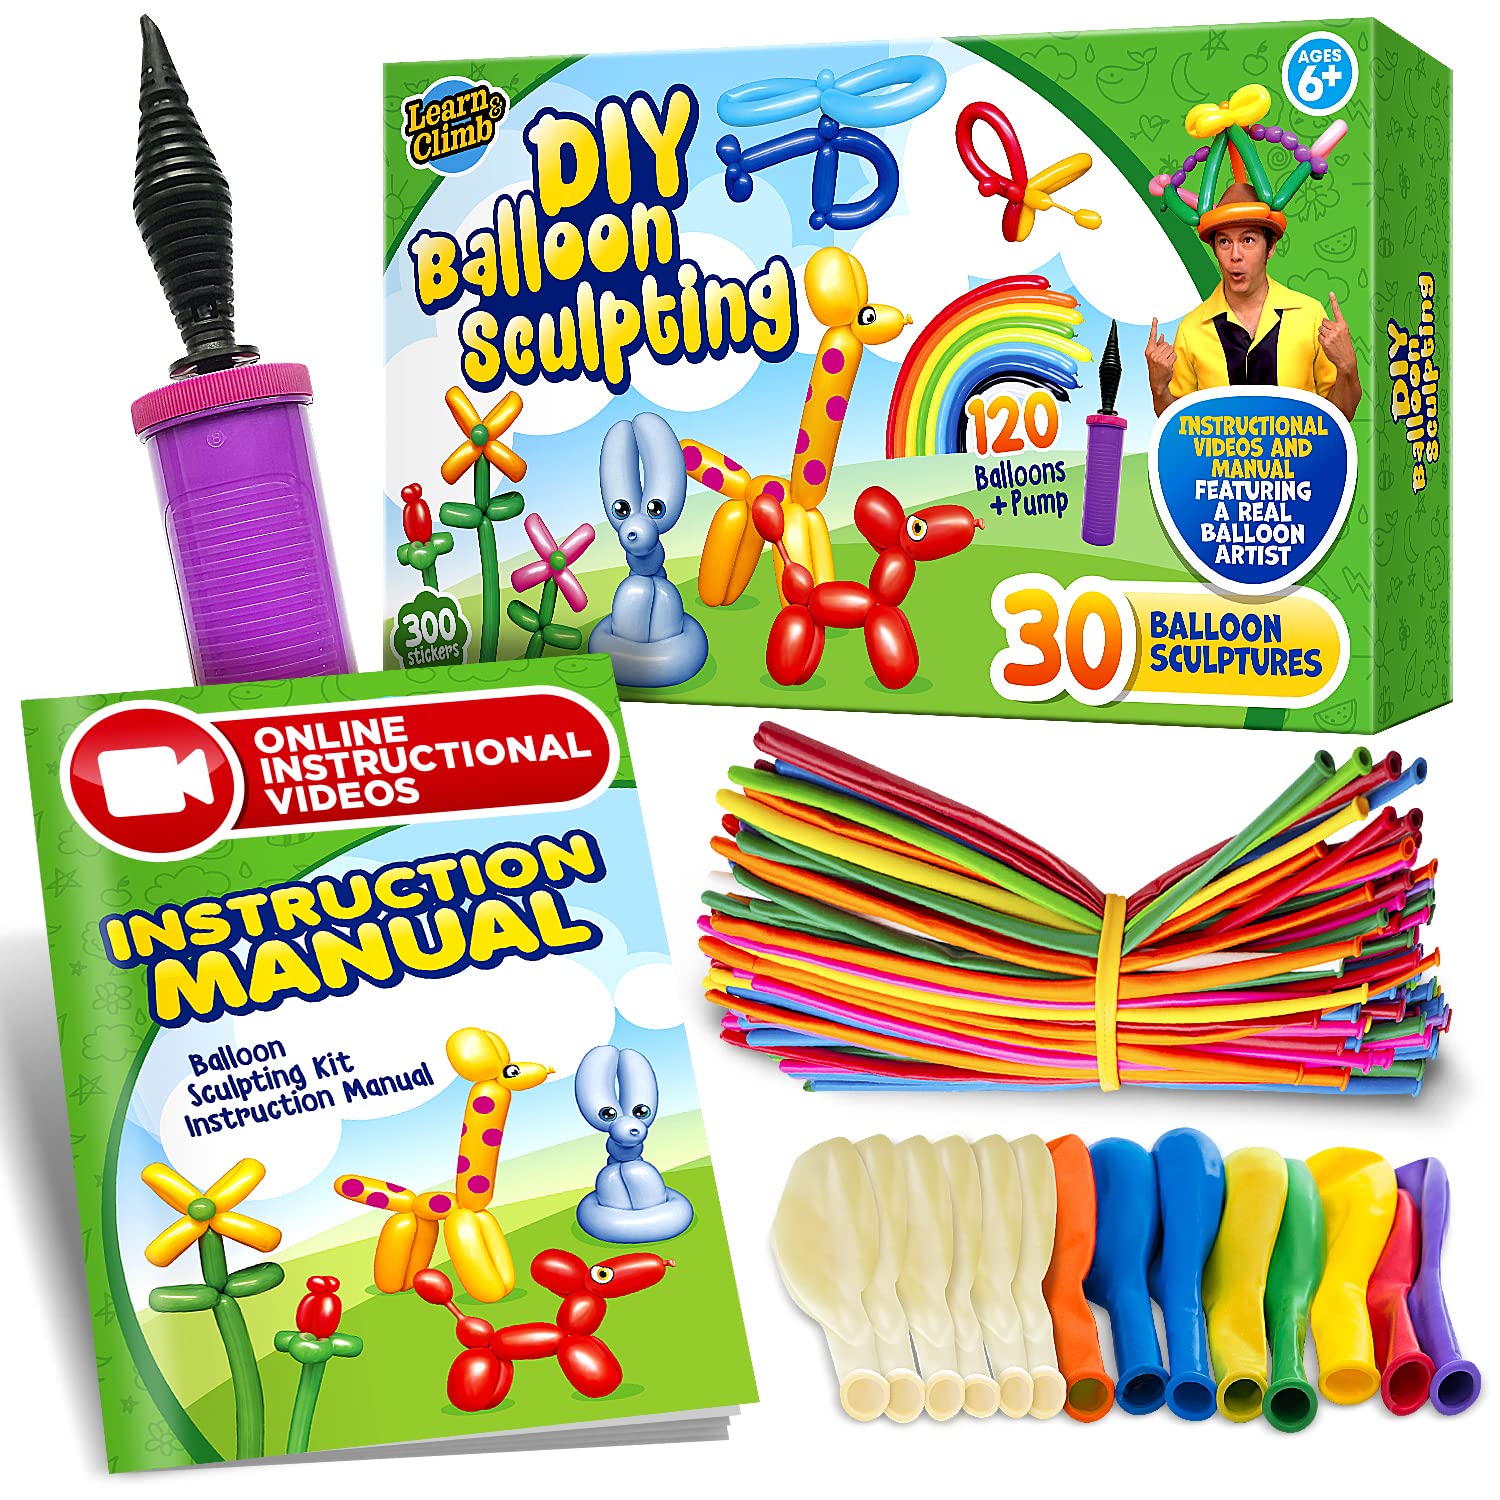 Learn & Climb DIY Balloon Animal Kit for beginners. Twisting & Modeling balloon Kit 30 + Sculptures,100 Balloons for balloon animals, Pump and